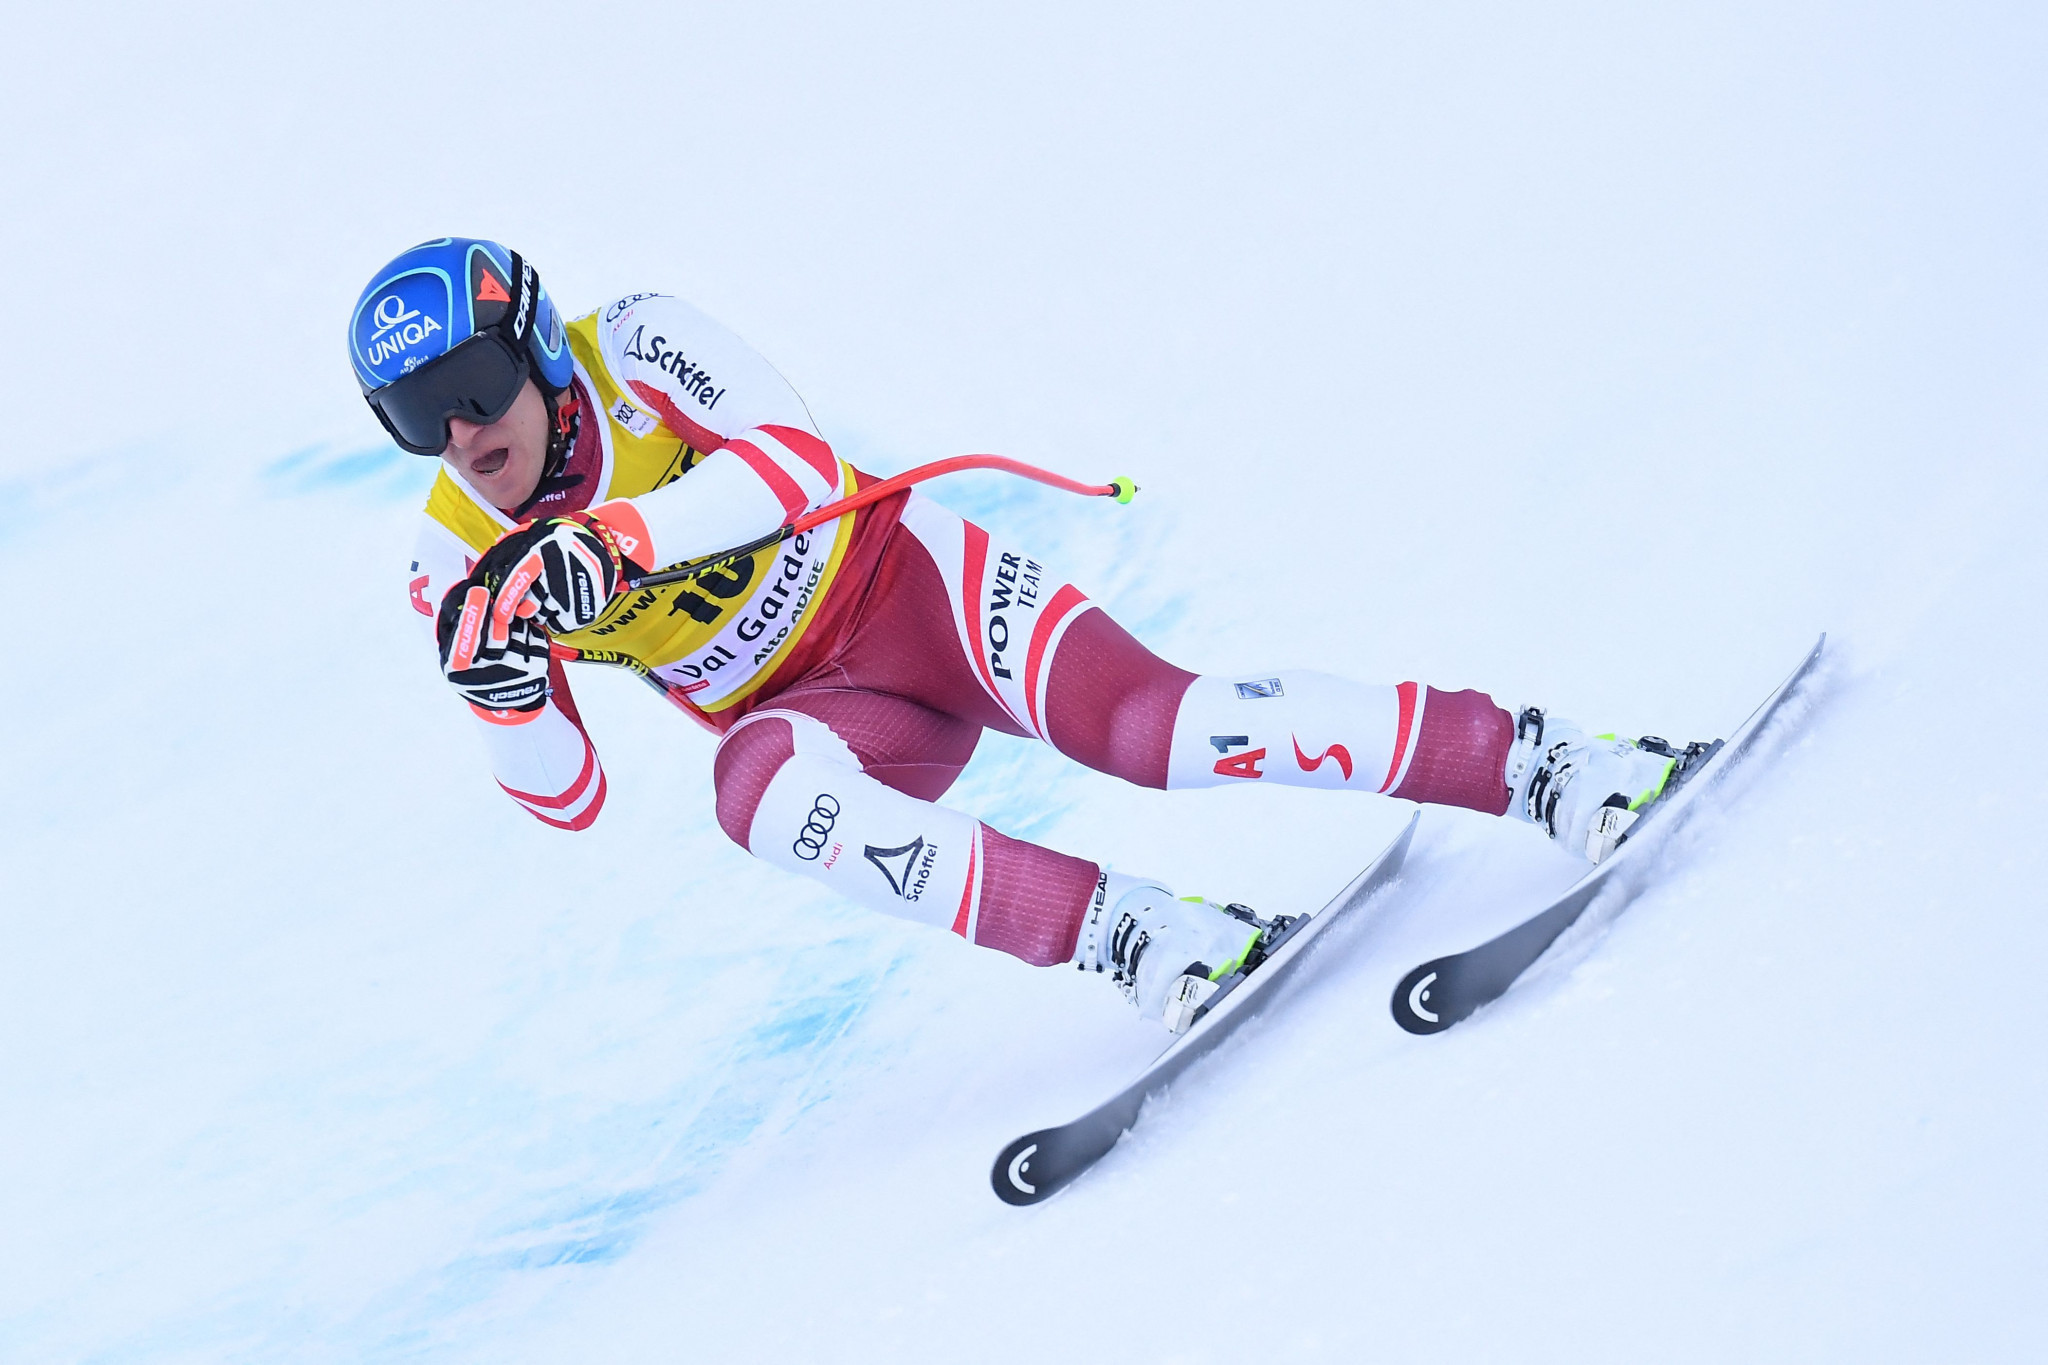 Olympic gold medallist Mayer announces shock retirement from skiing